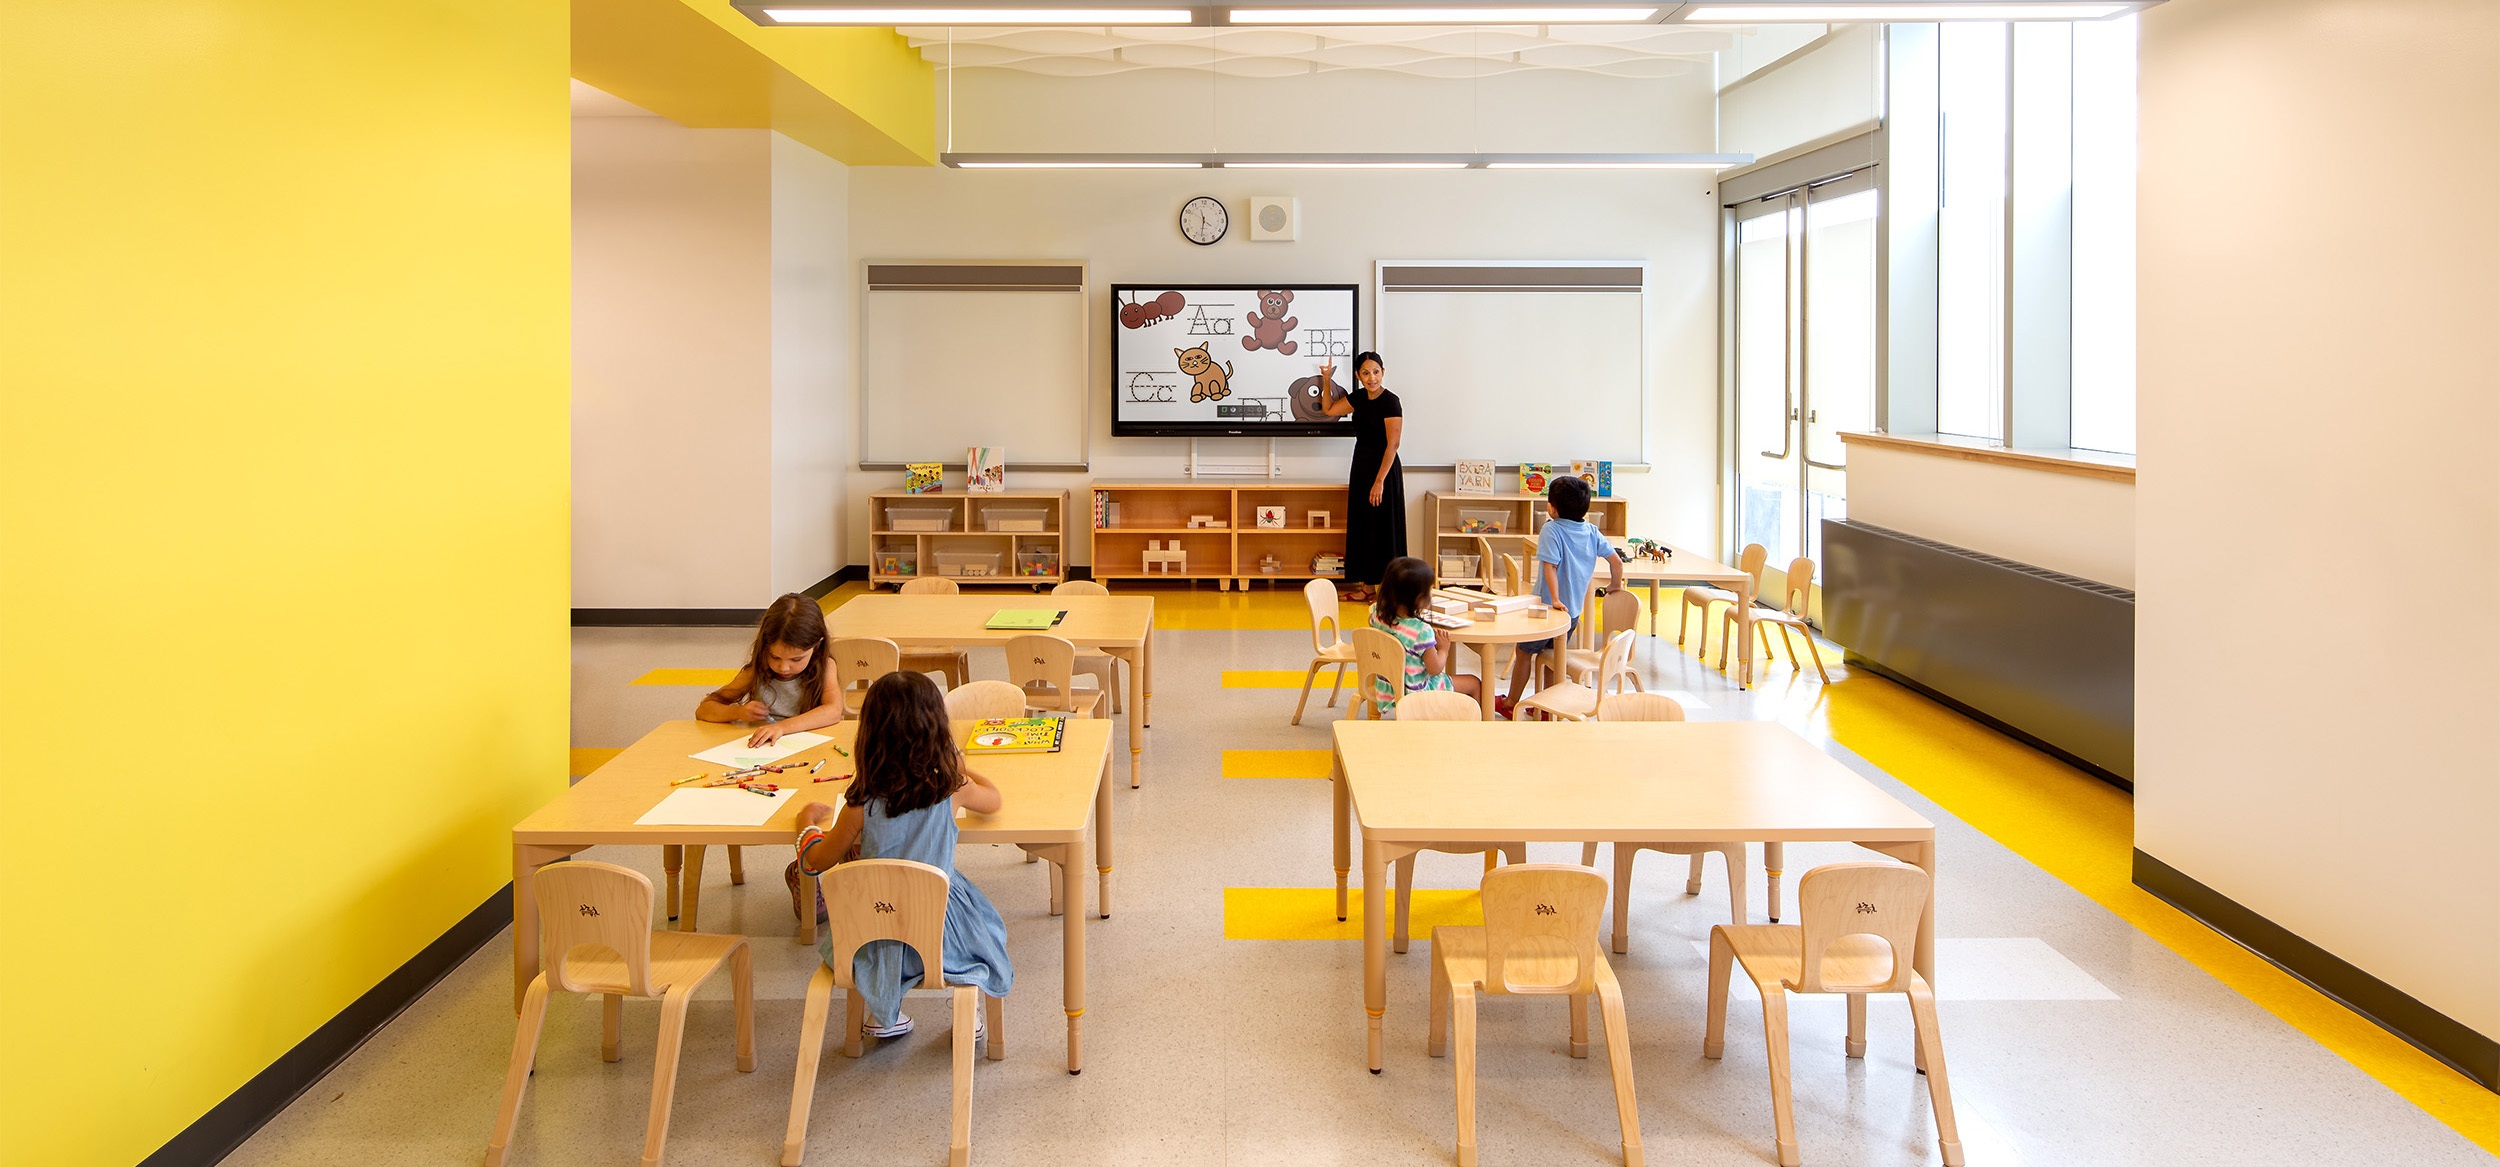 Pre-K students in the yellow classroom